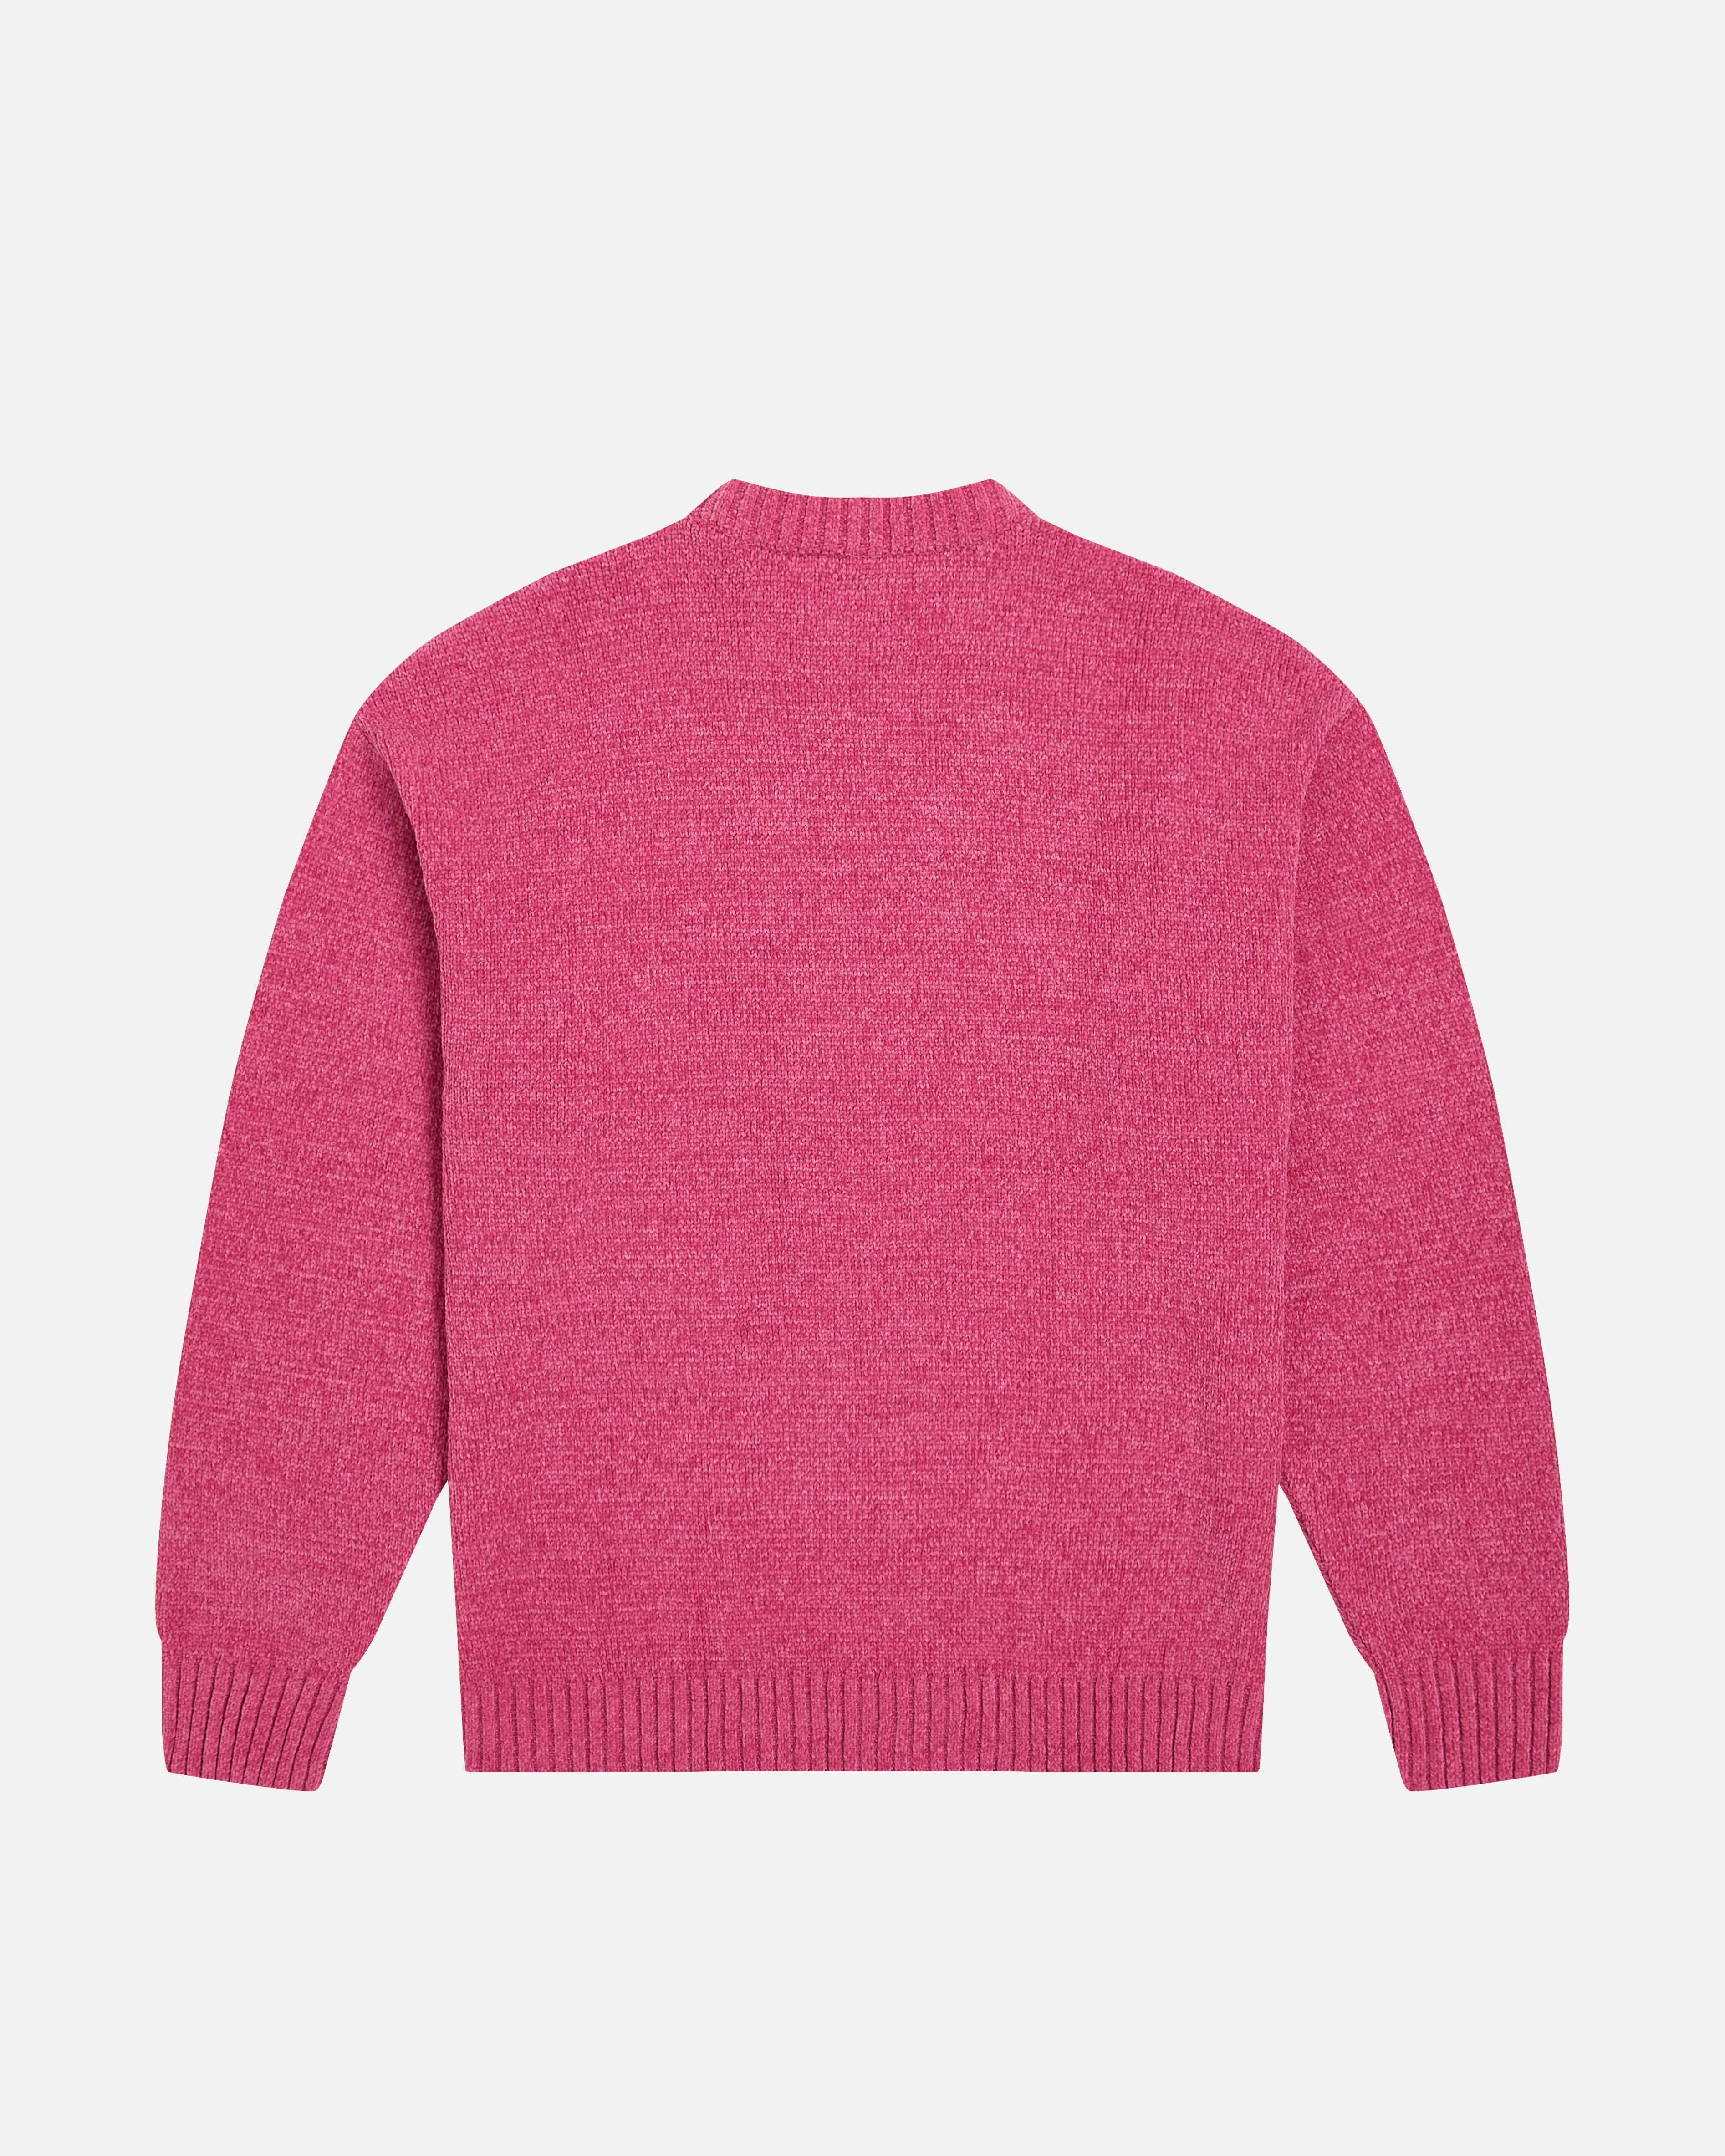 Patta Chenille Knitted Sweater image